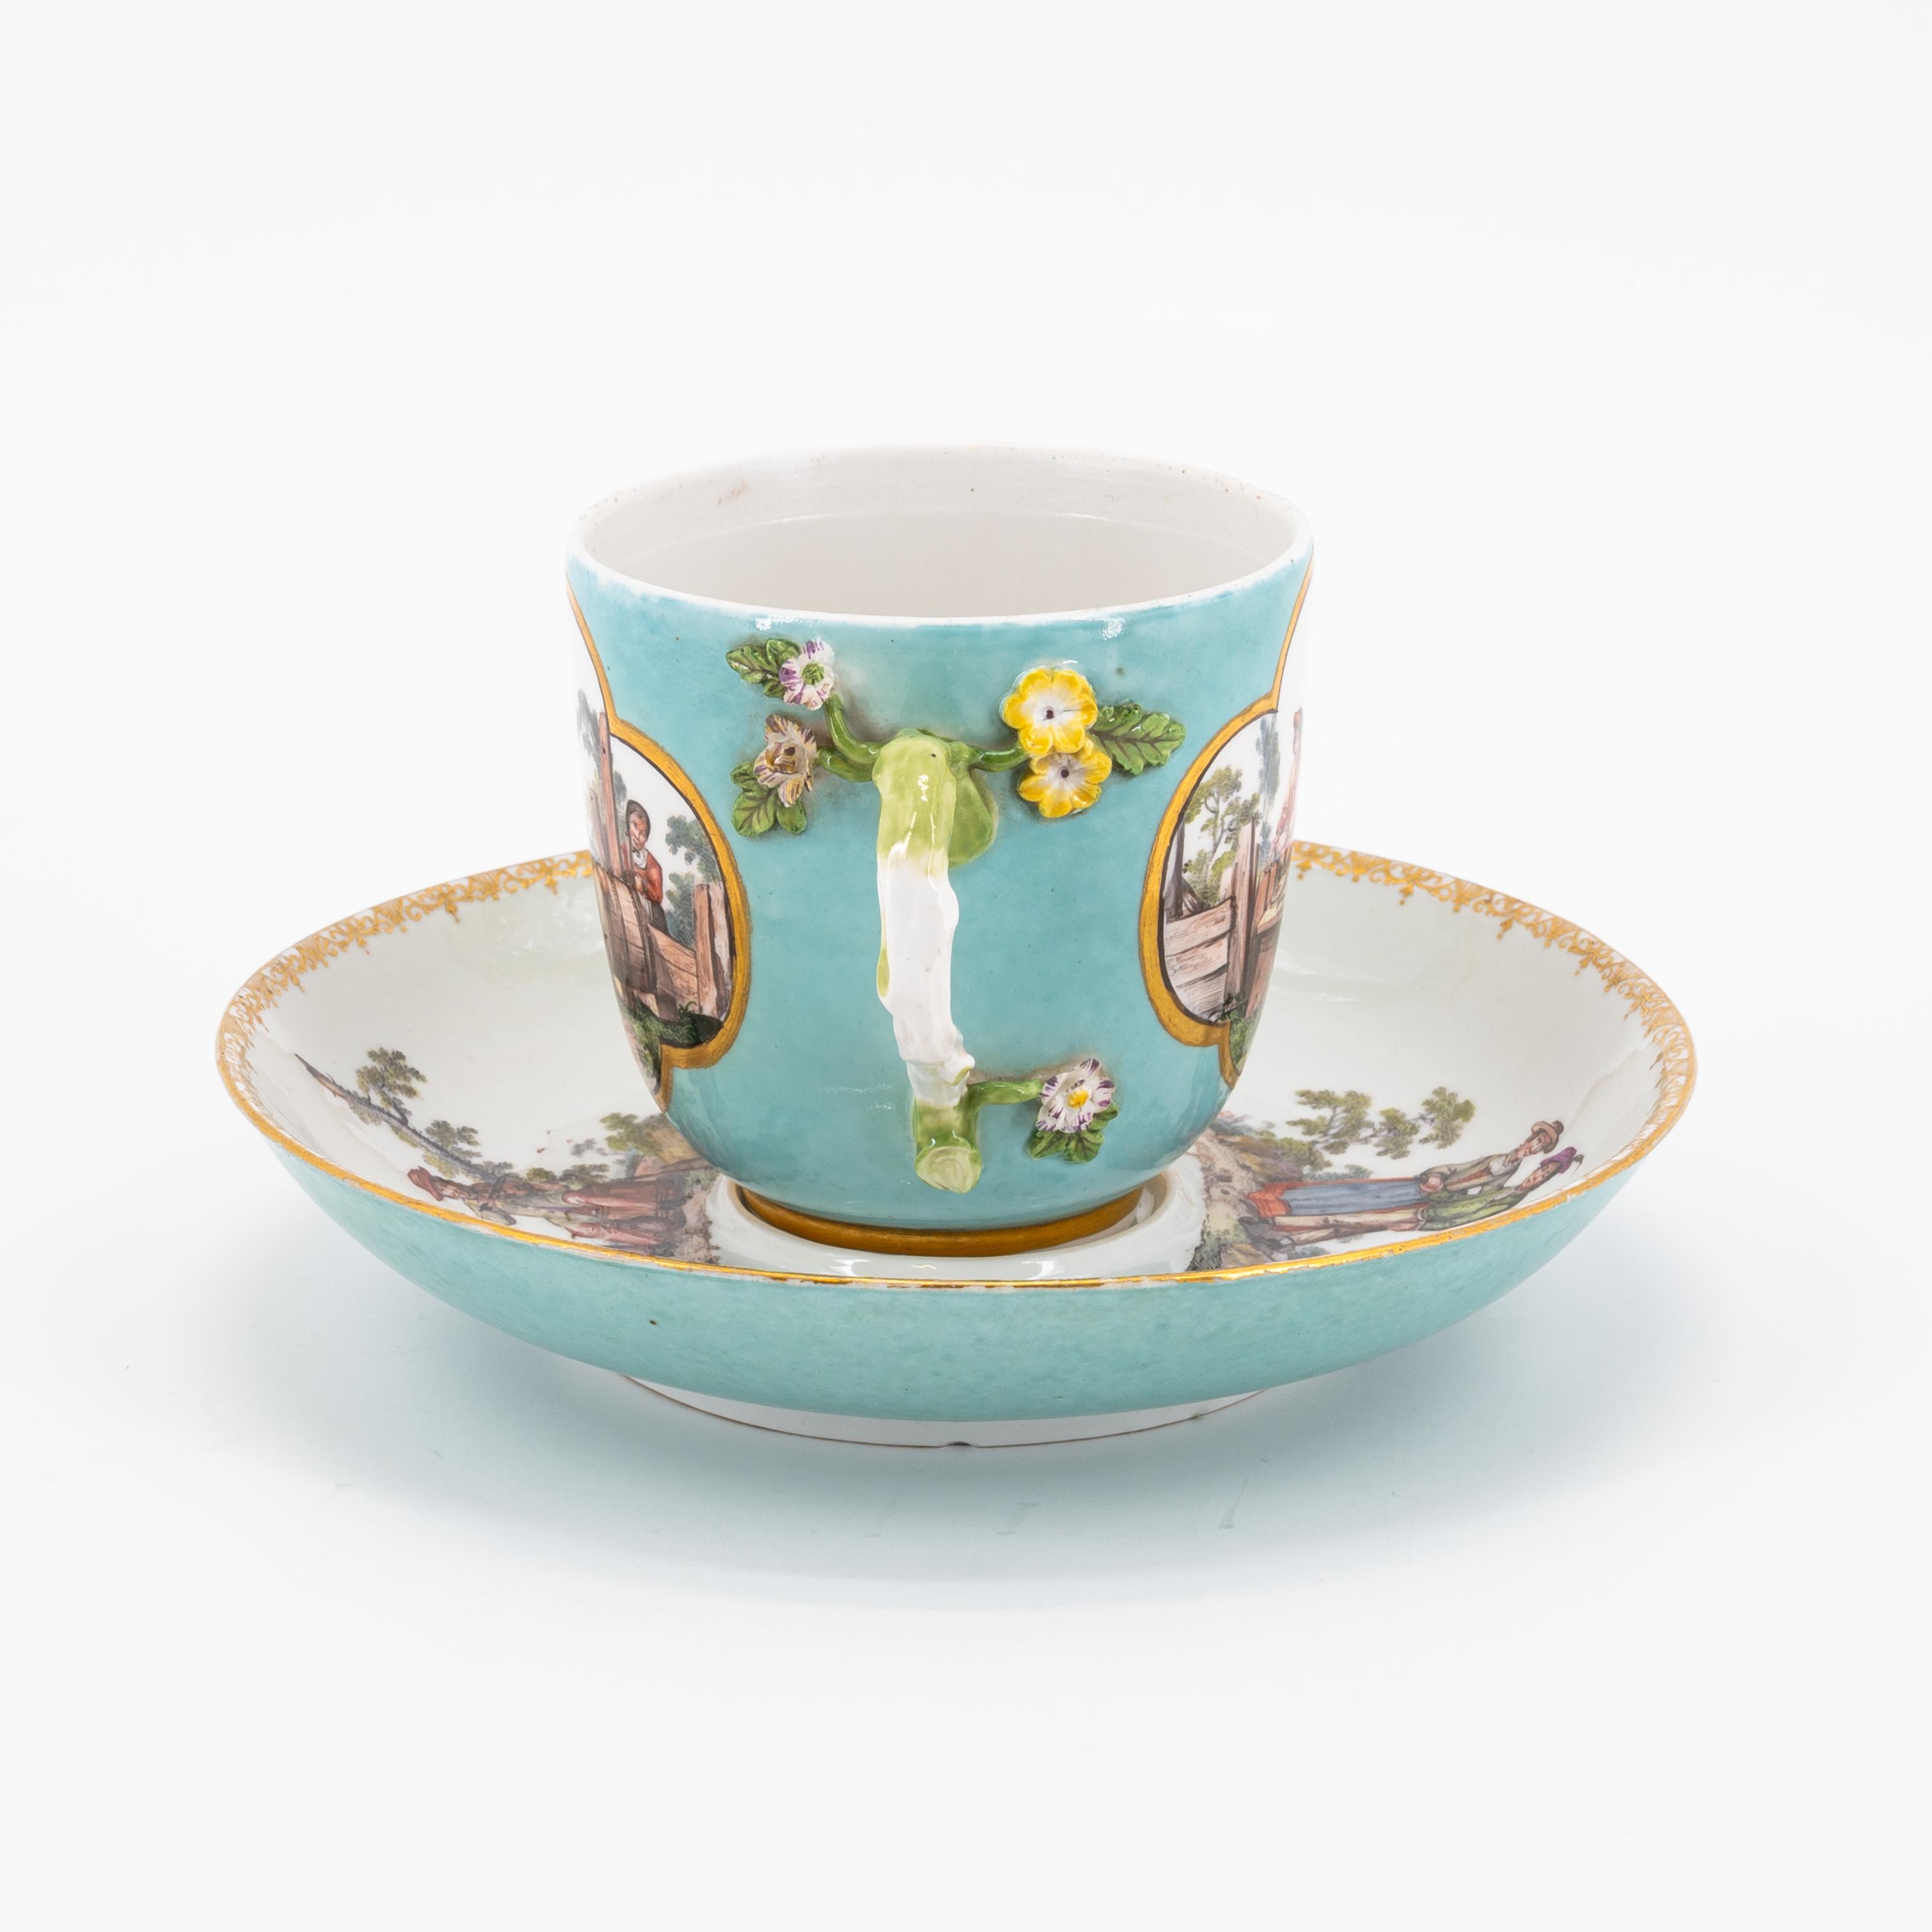 PORCELAIN MUG WITH TURQUOISE GROUND, APPLIED FLOWERS AND RURAL SCENES - Image 2 of 6